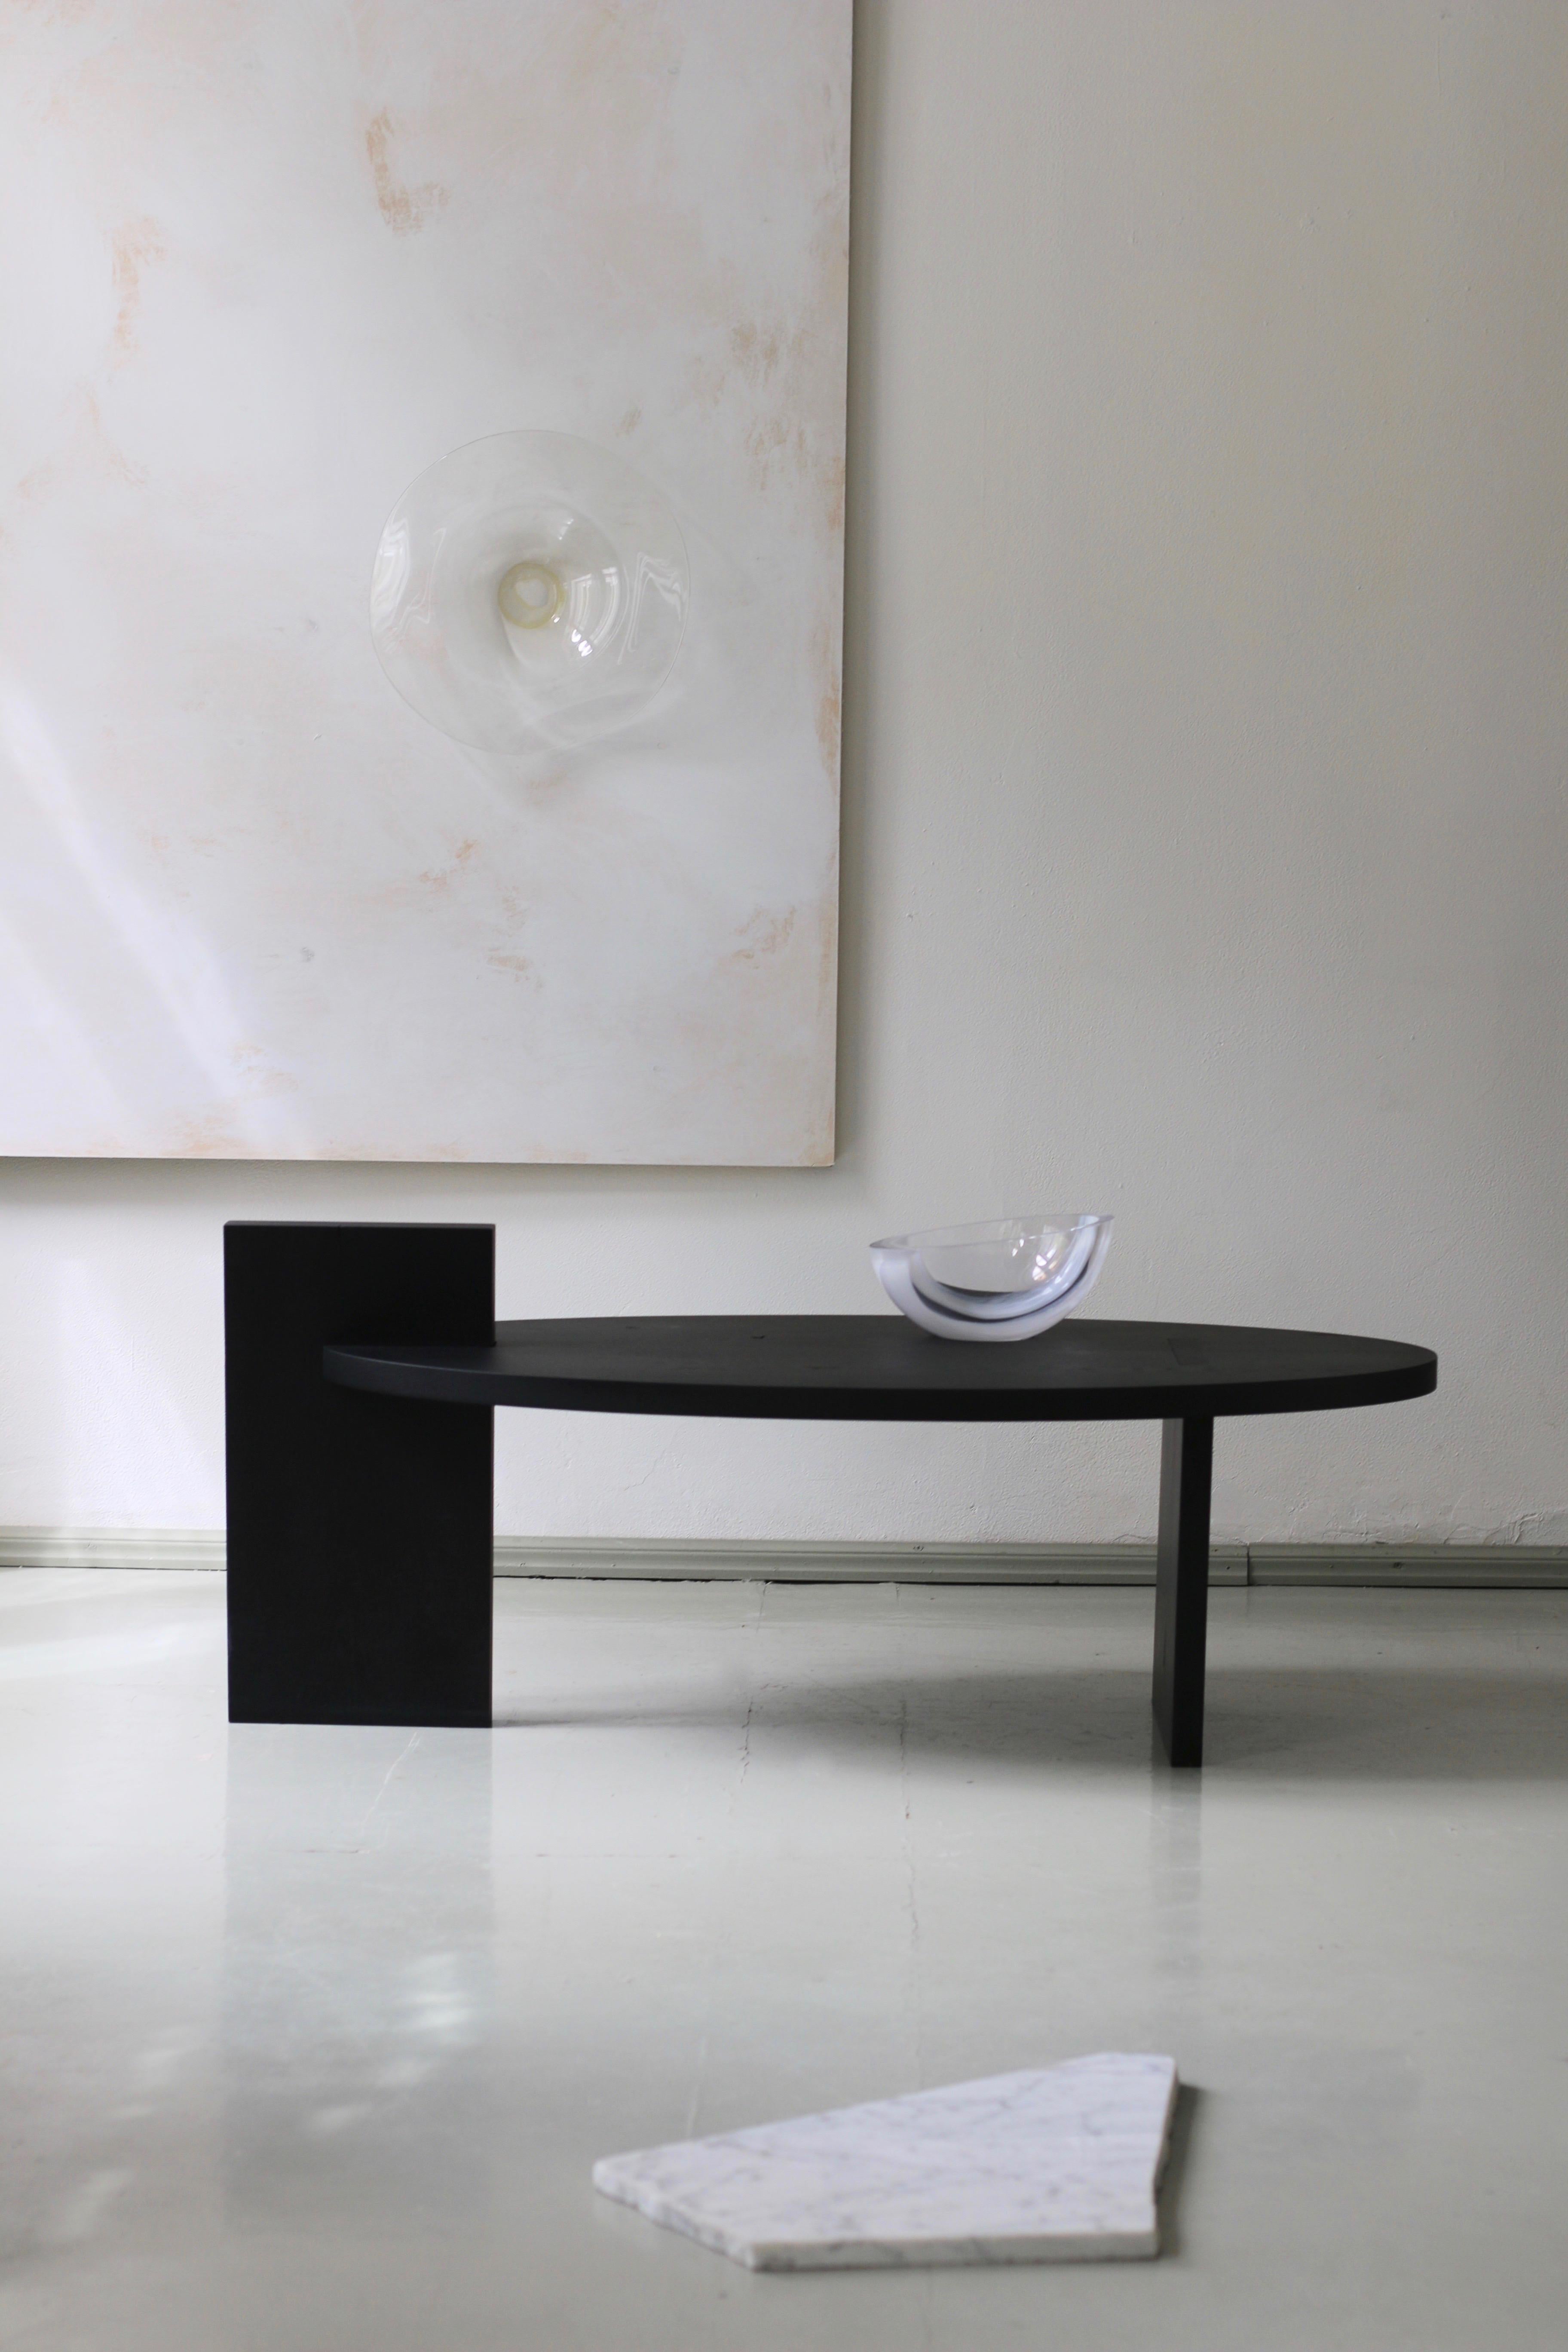 'Black Lotus' contemporary minimalist coffee table is defined as ‘art with function’. It consists of only three pieces that are held together by interlocking geometrical cuts without additional bracing. 
Hand-picked solid oak slabs with natural wood